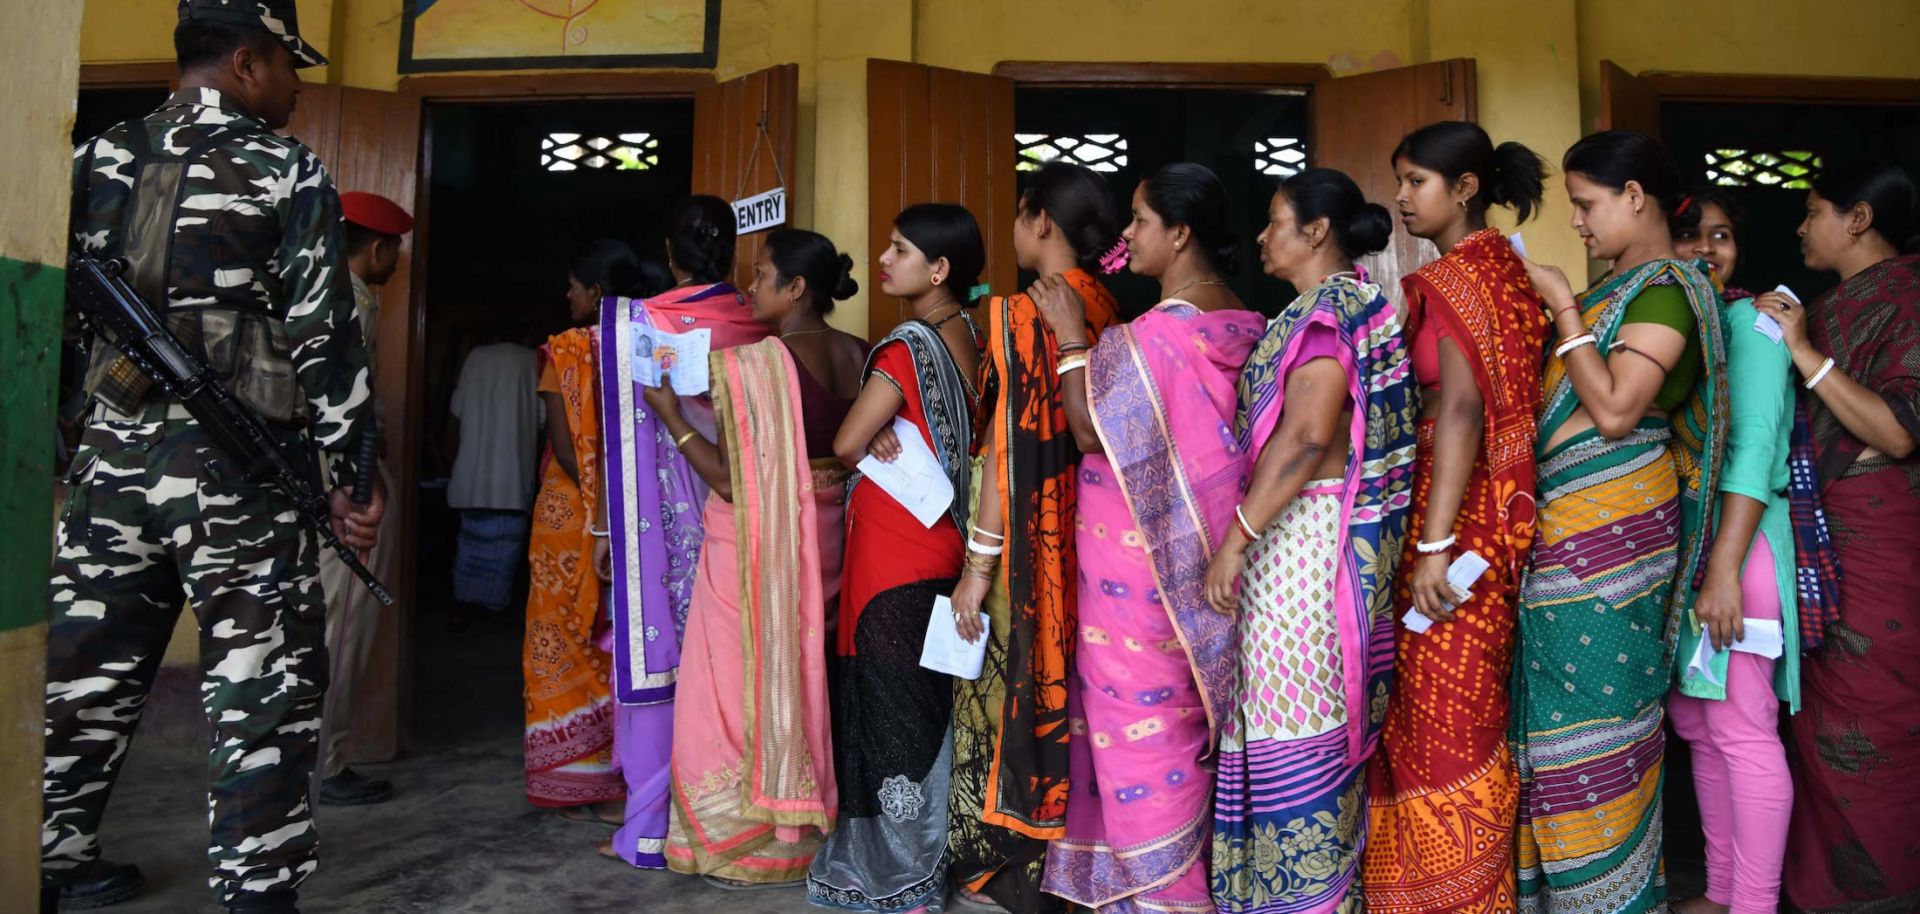 Indian voters stand in line to cast their votes.